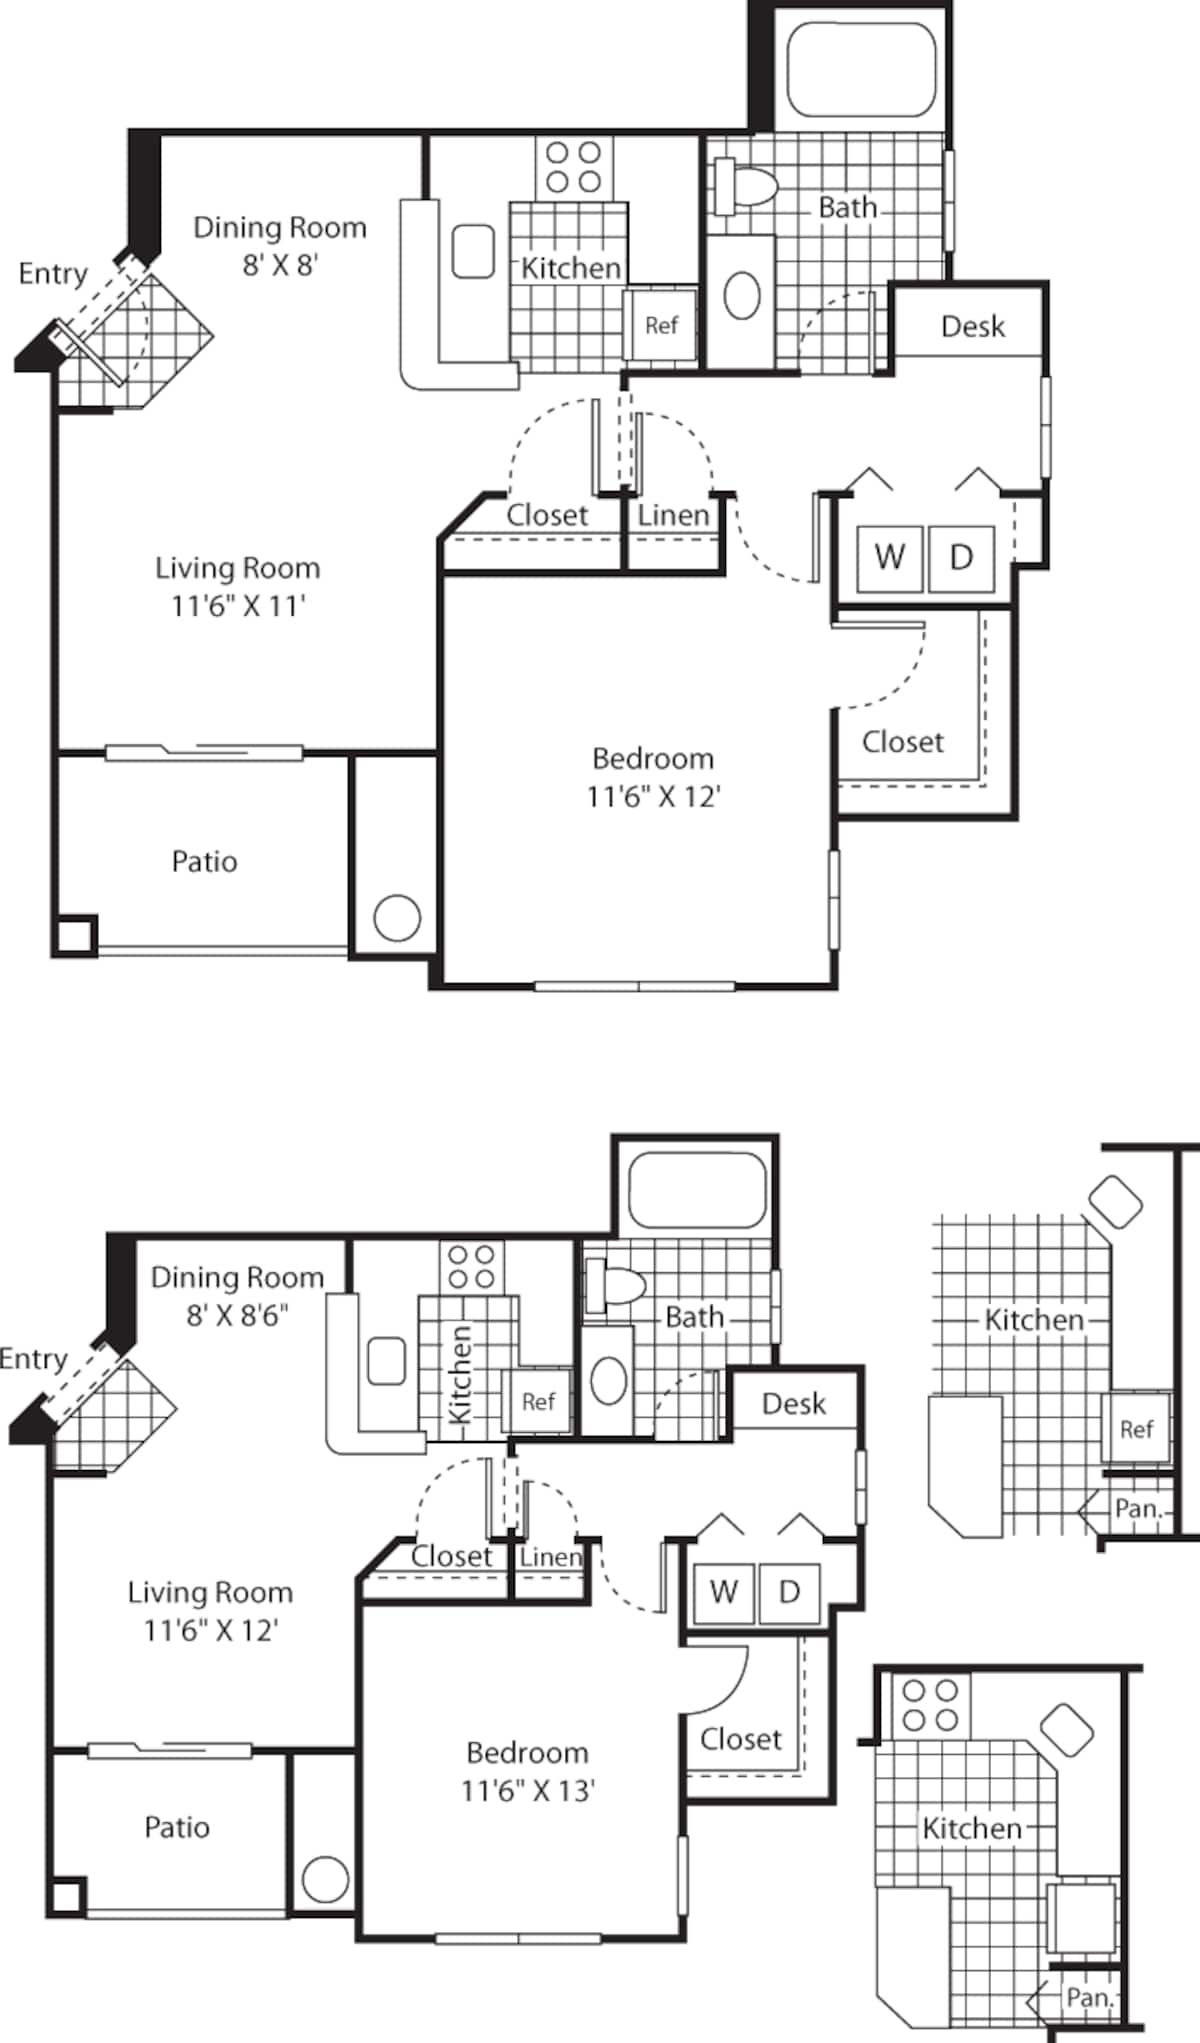 Floorplan diagram for One Bed A-2 - Phase I, showing 1 bedroom